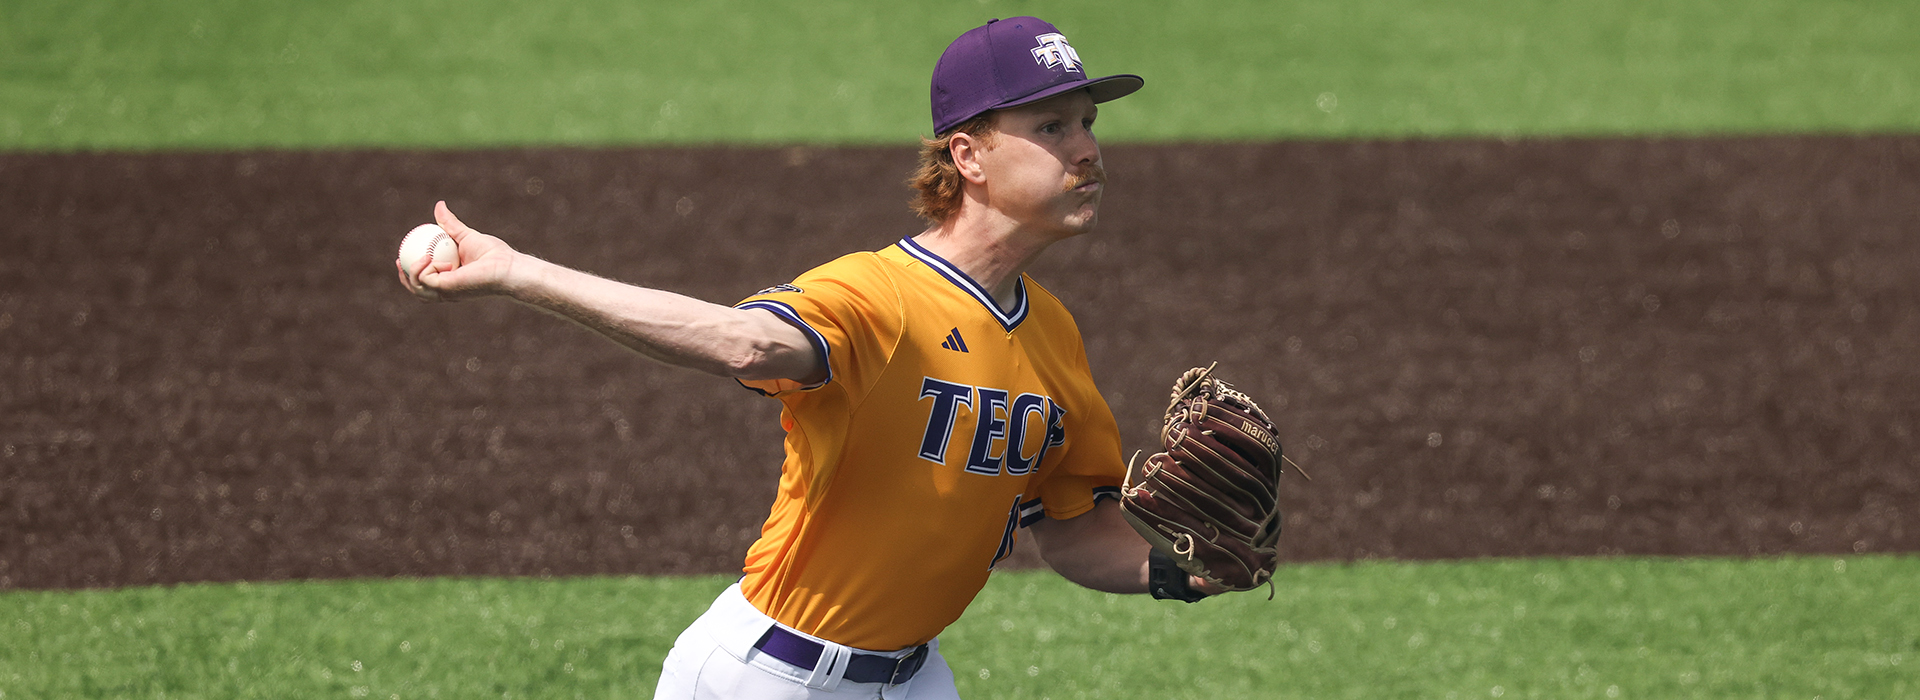 Calitri dazzles again, offense shines in 10-2 Tech win over Redhawks